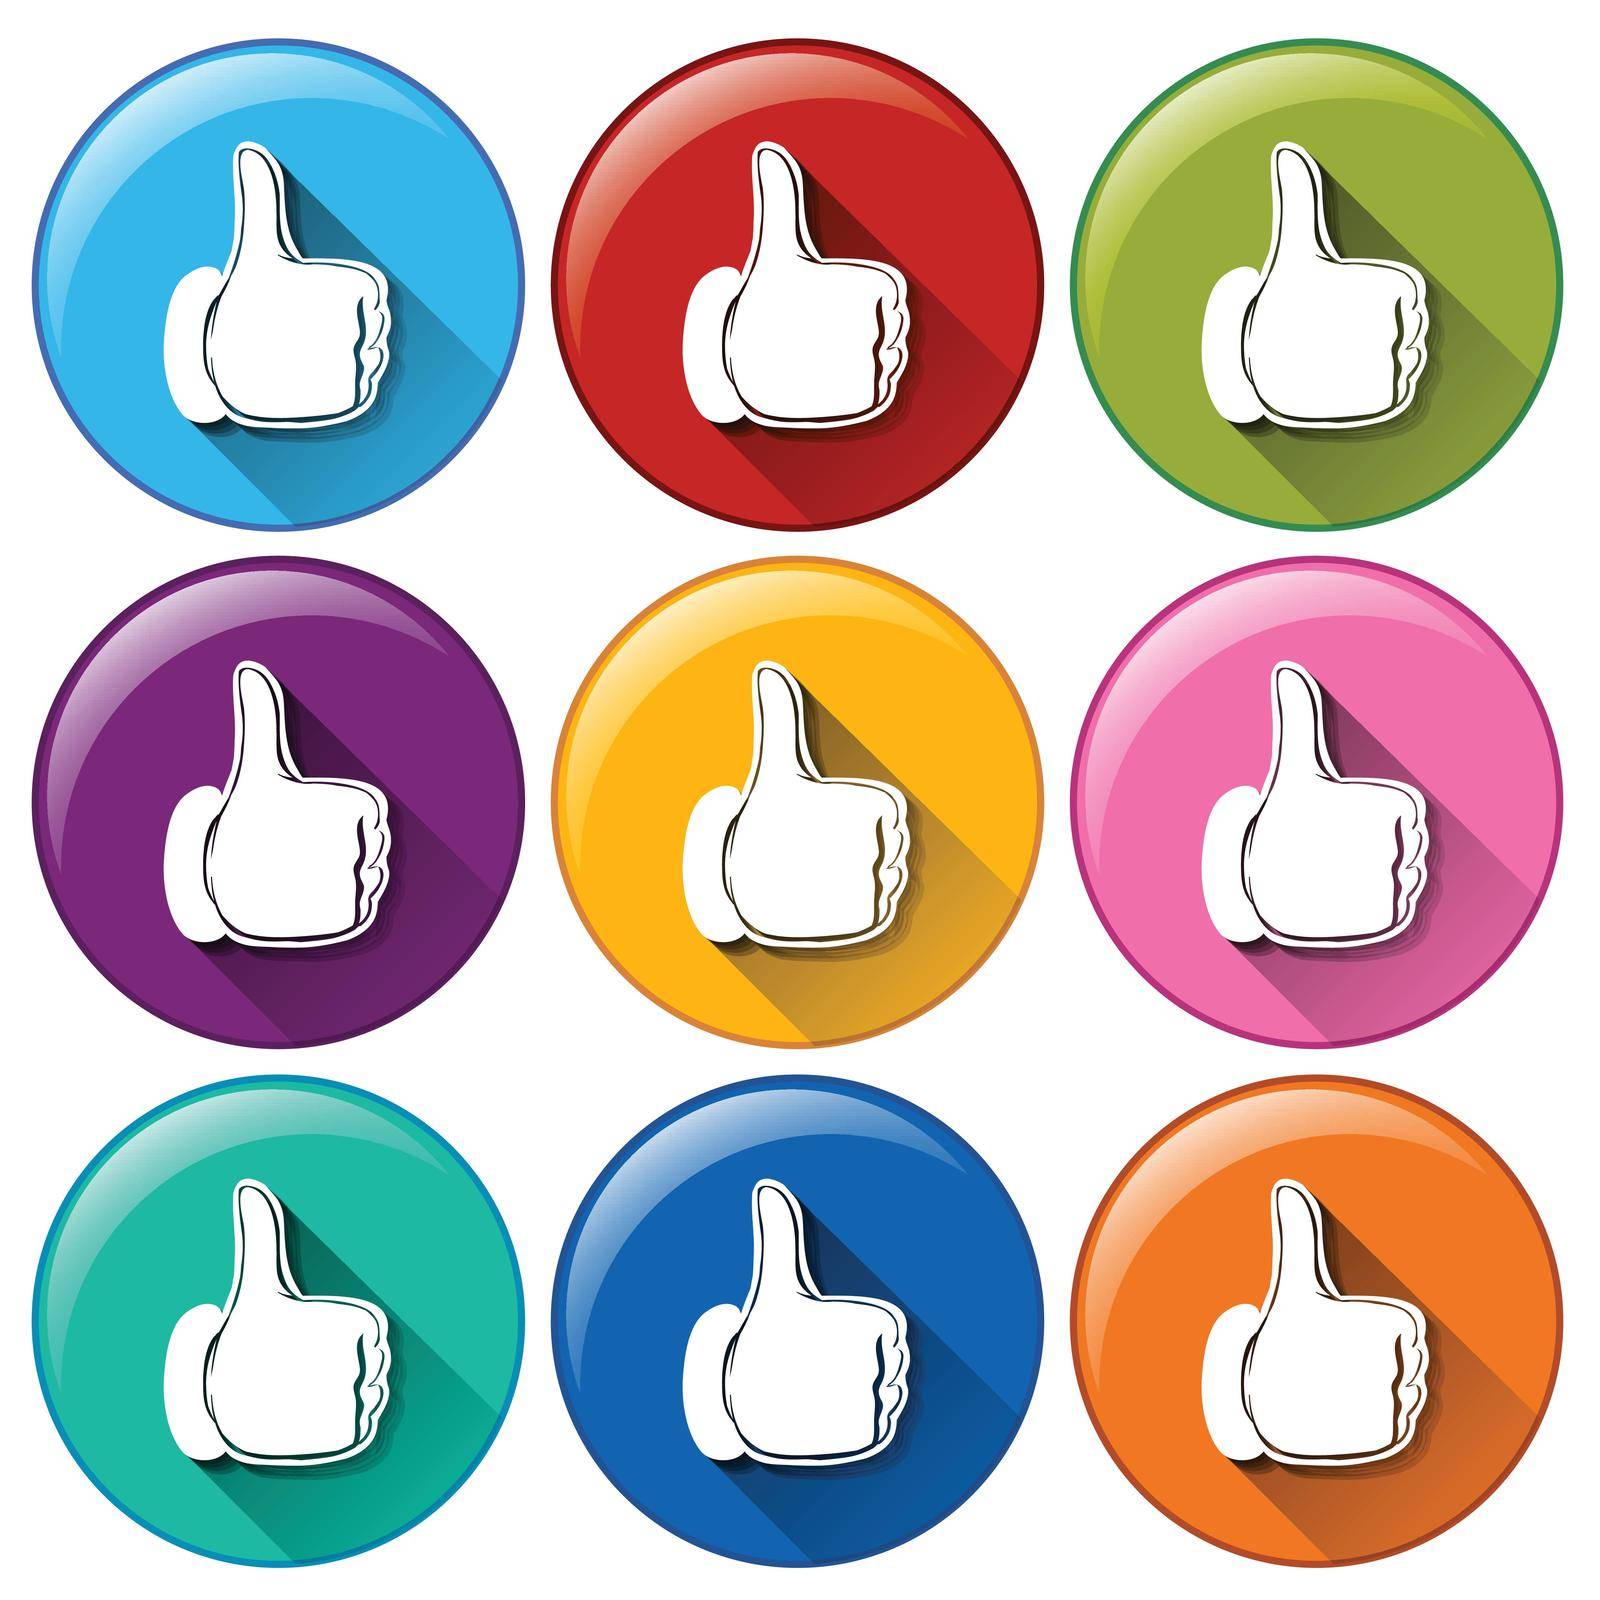 Illustration of the round icons with approval sign on a white background